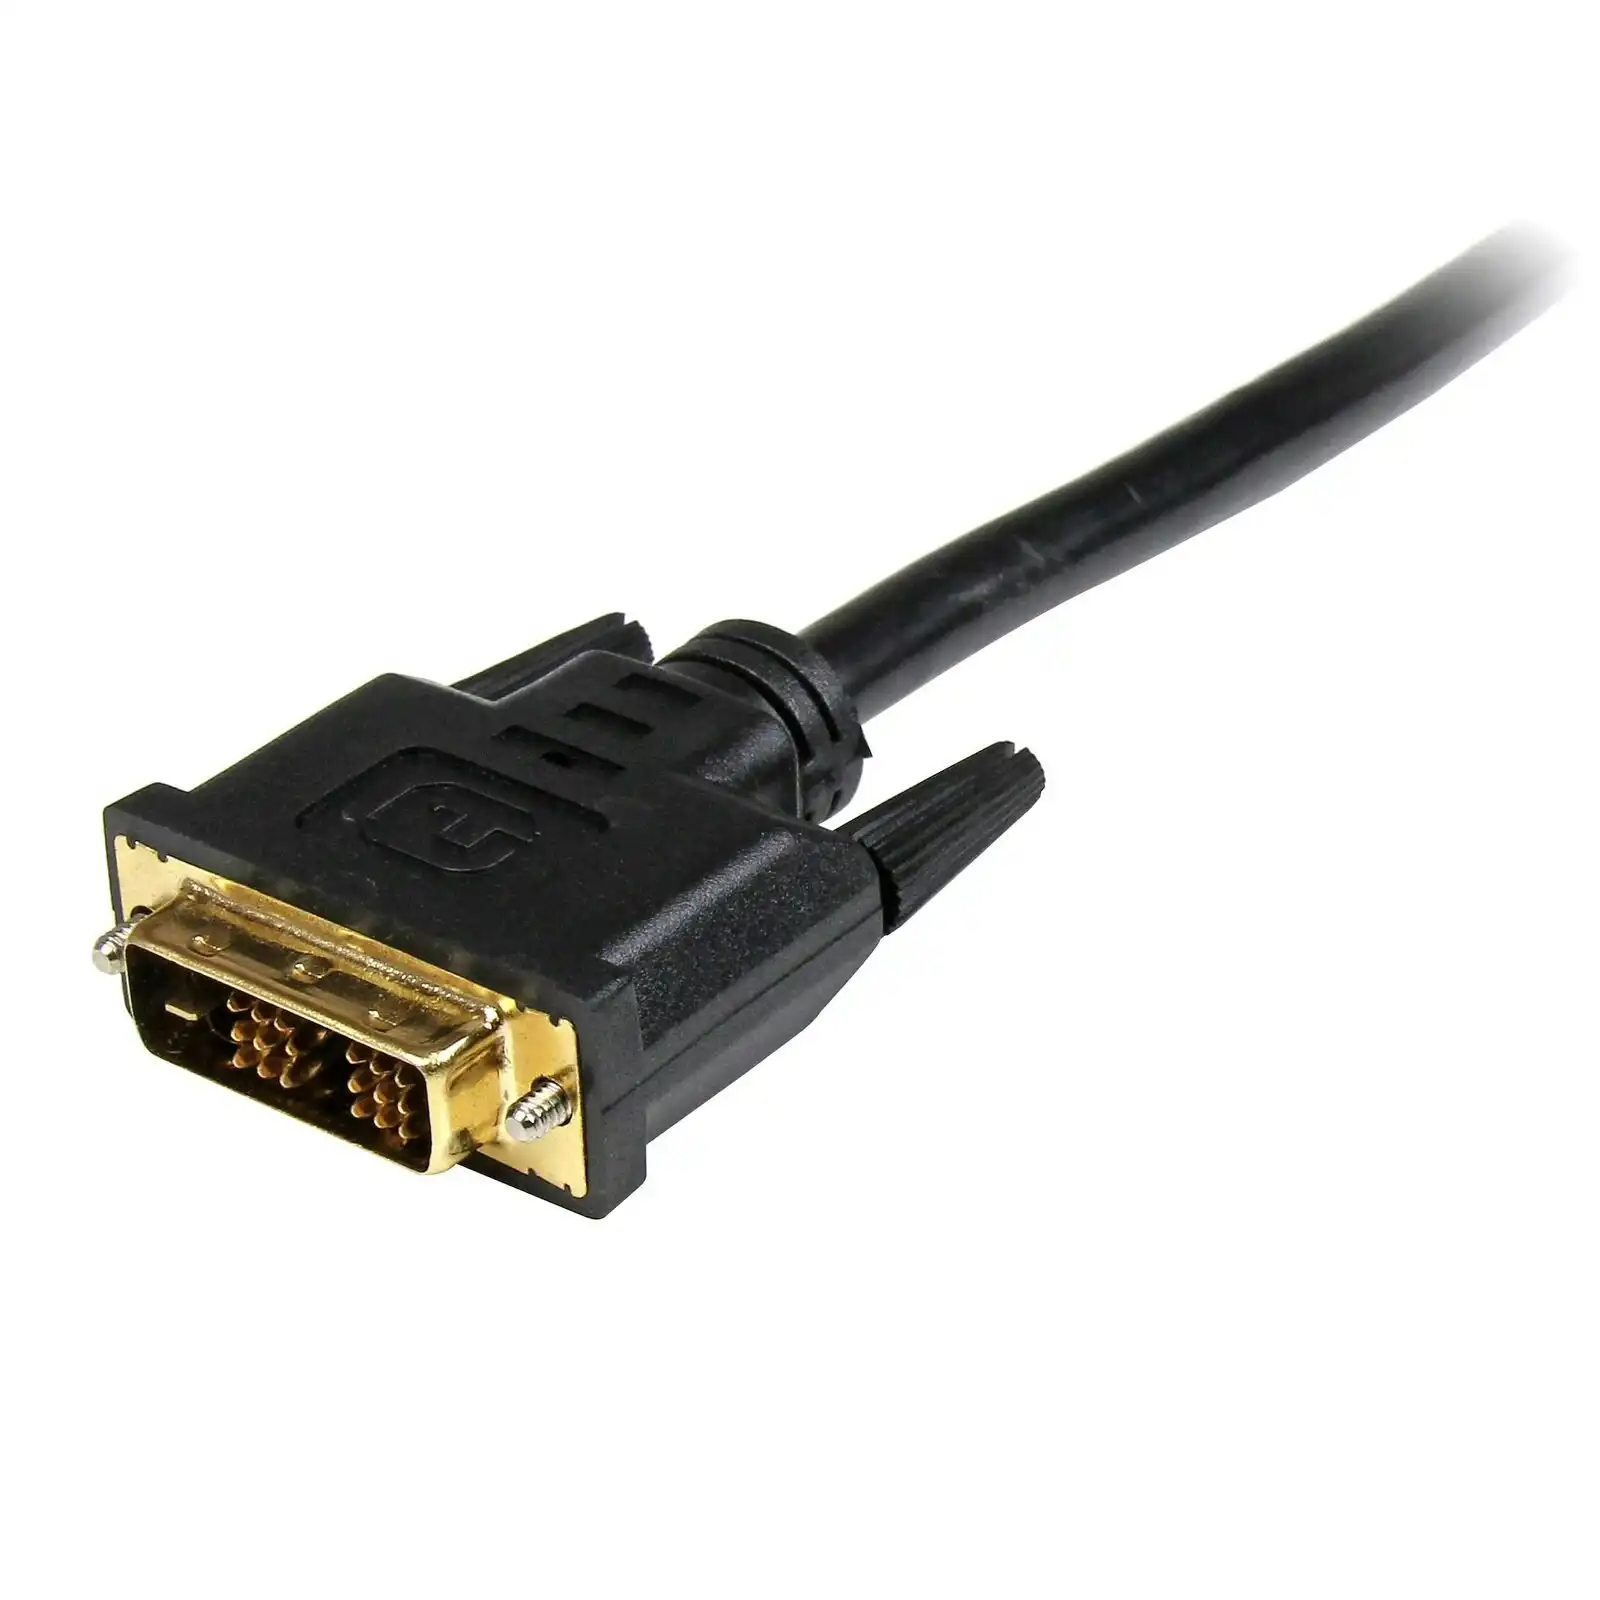 Star Tech 0.5M Male HDMI to Male DVI-D Braided Cable Video Adapter for Laptop BK